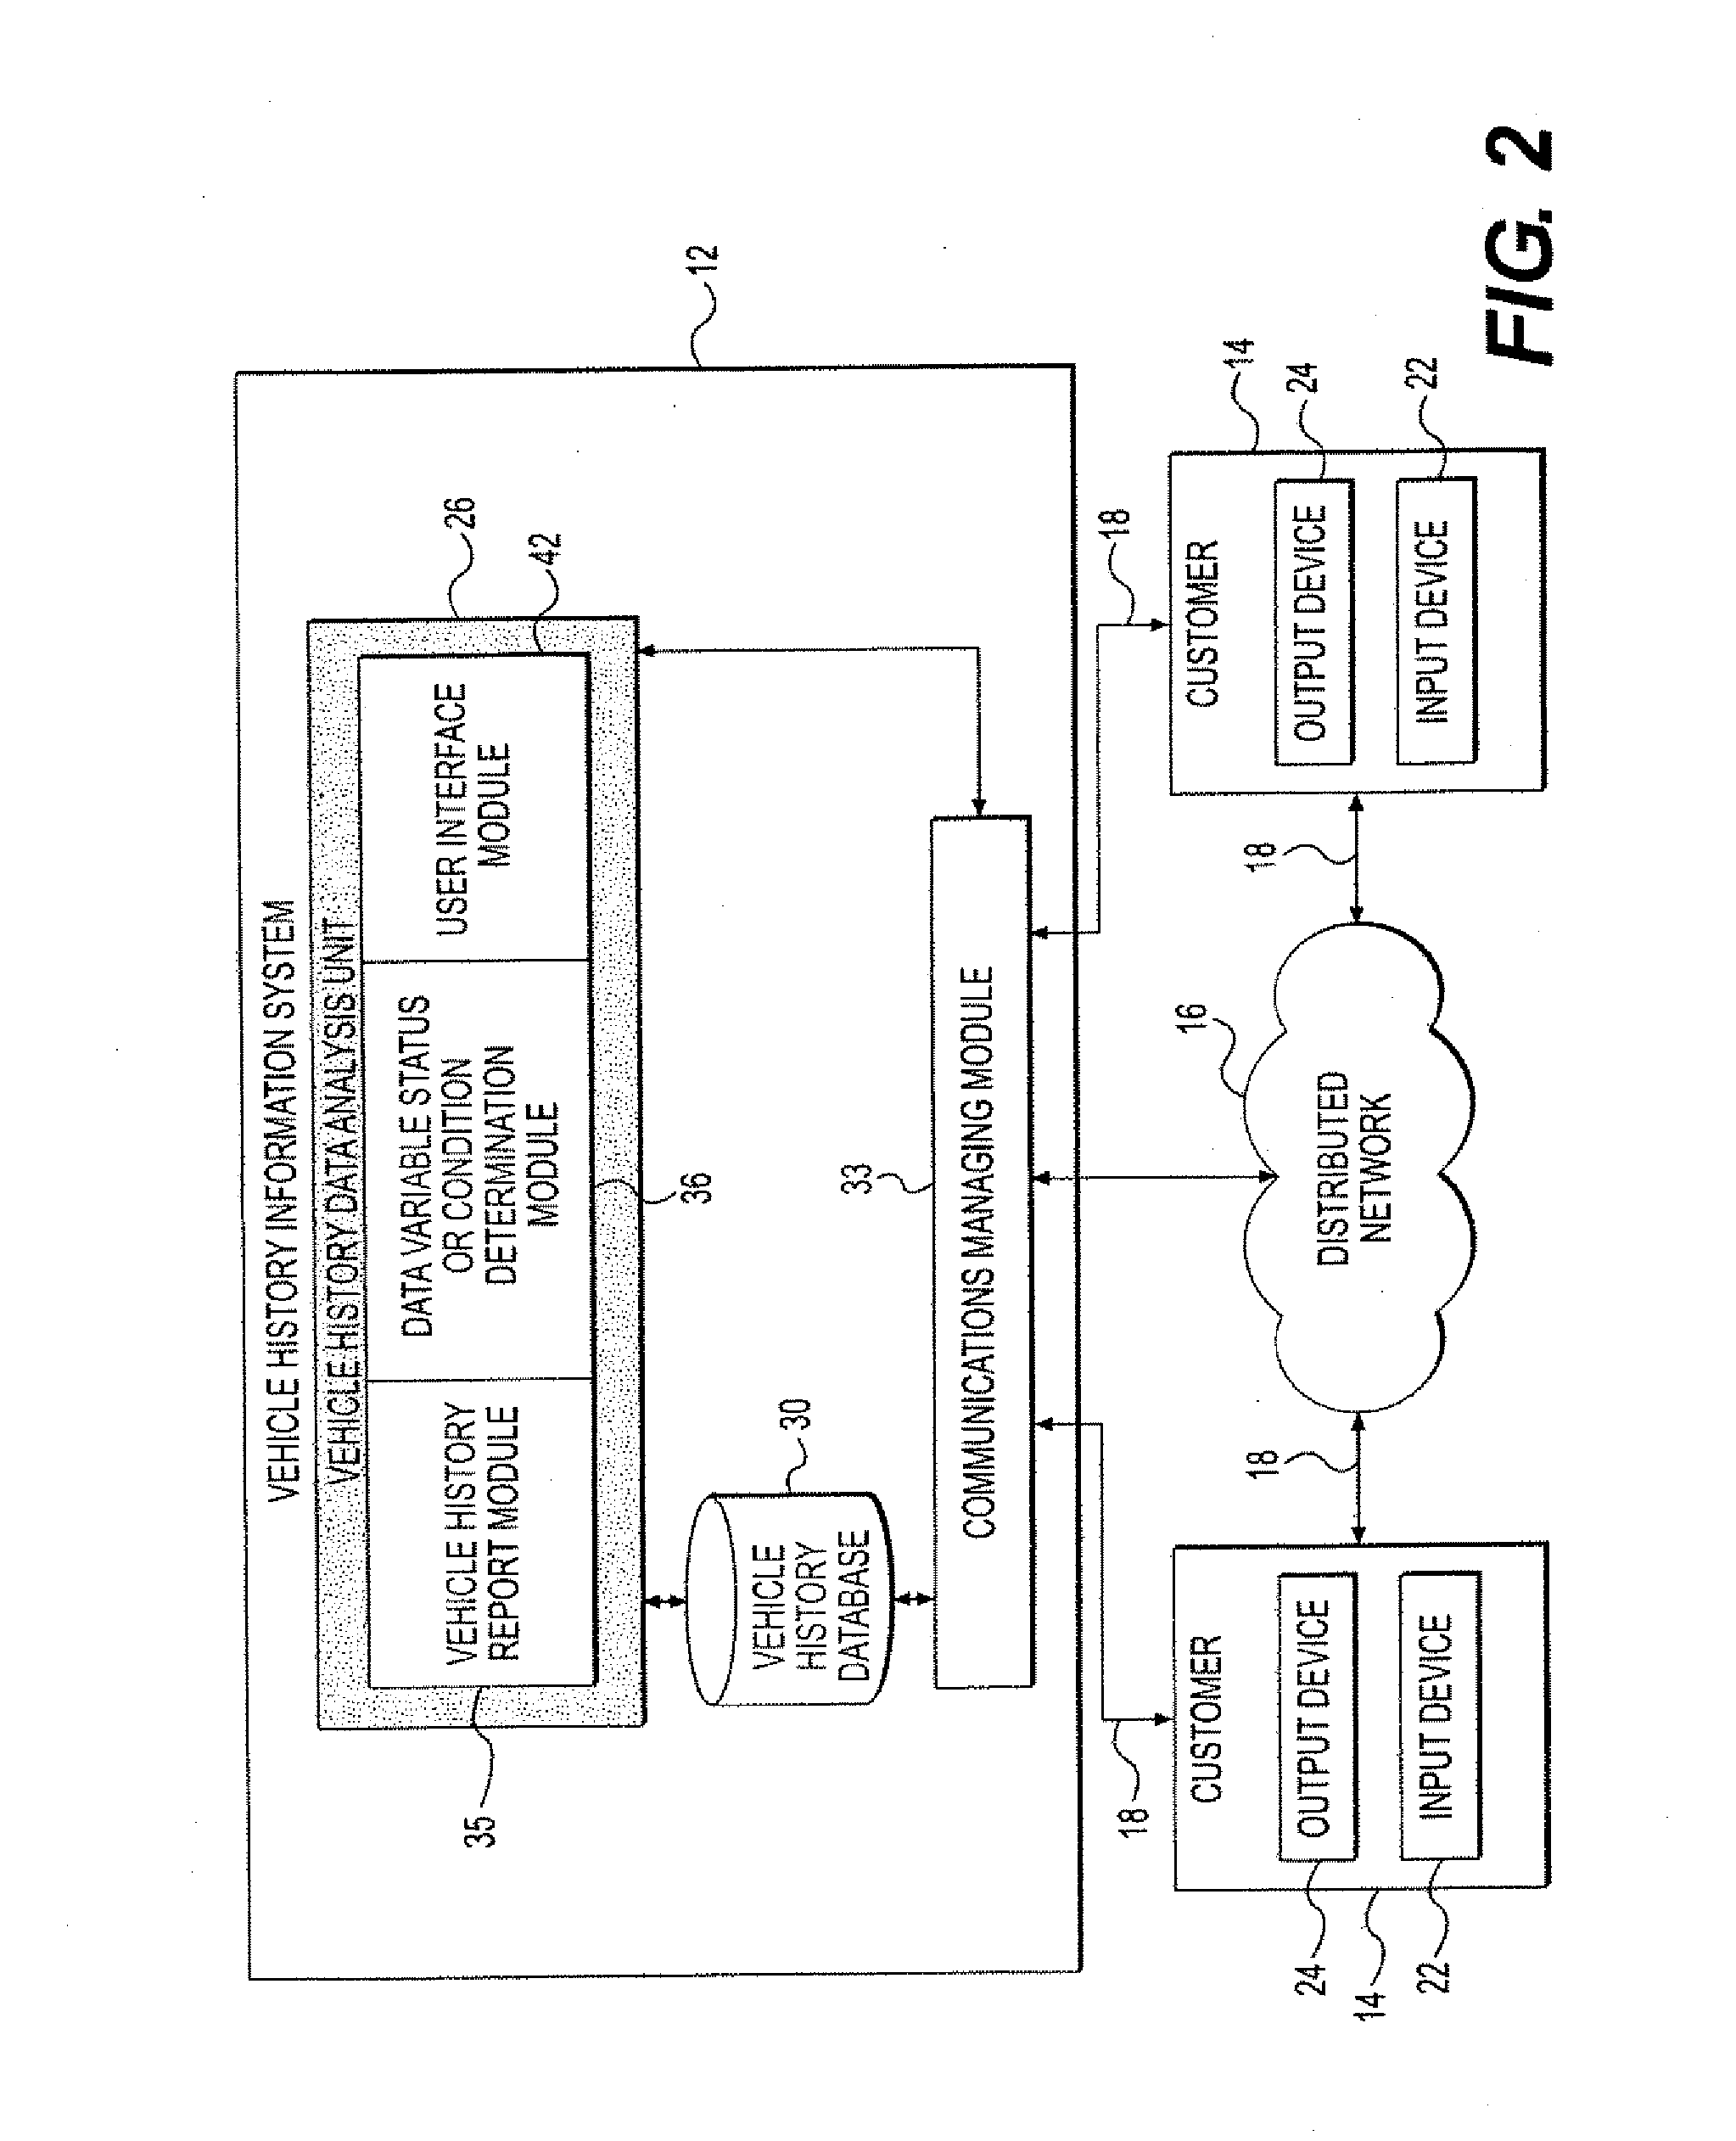 System and method for insurance underwriting and rating